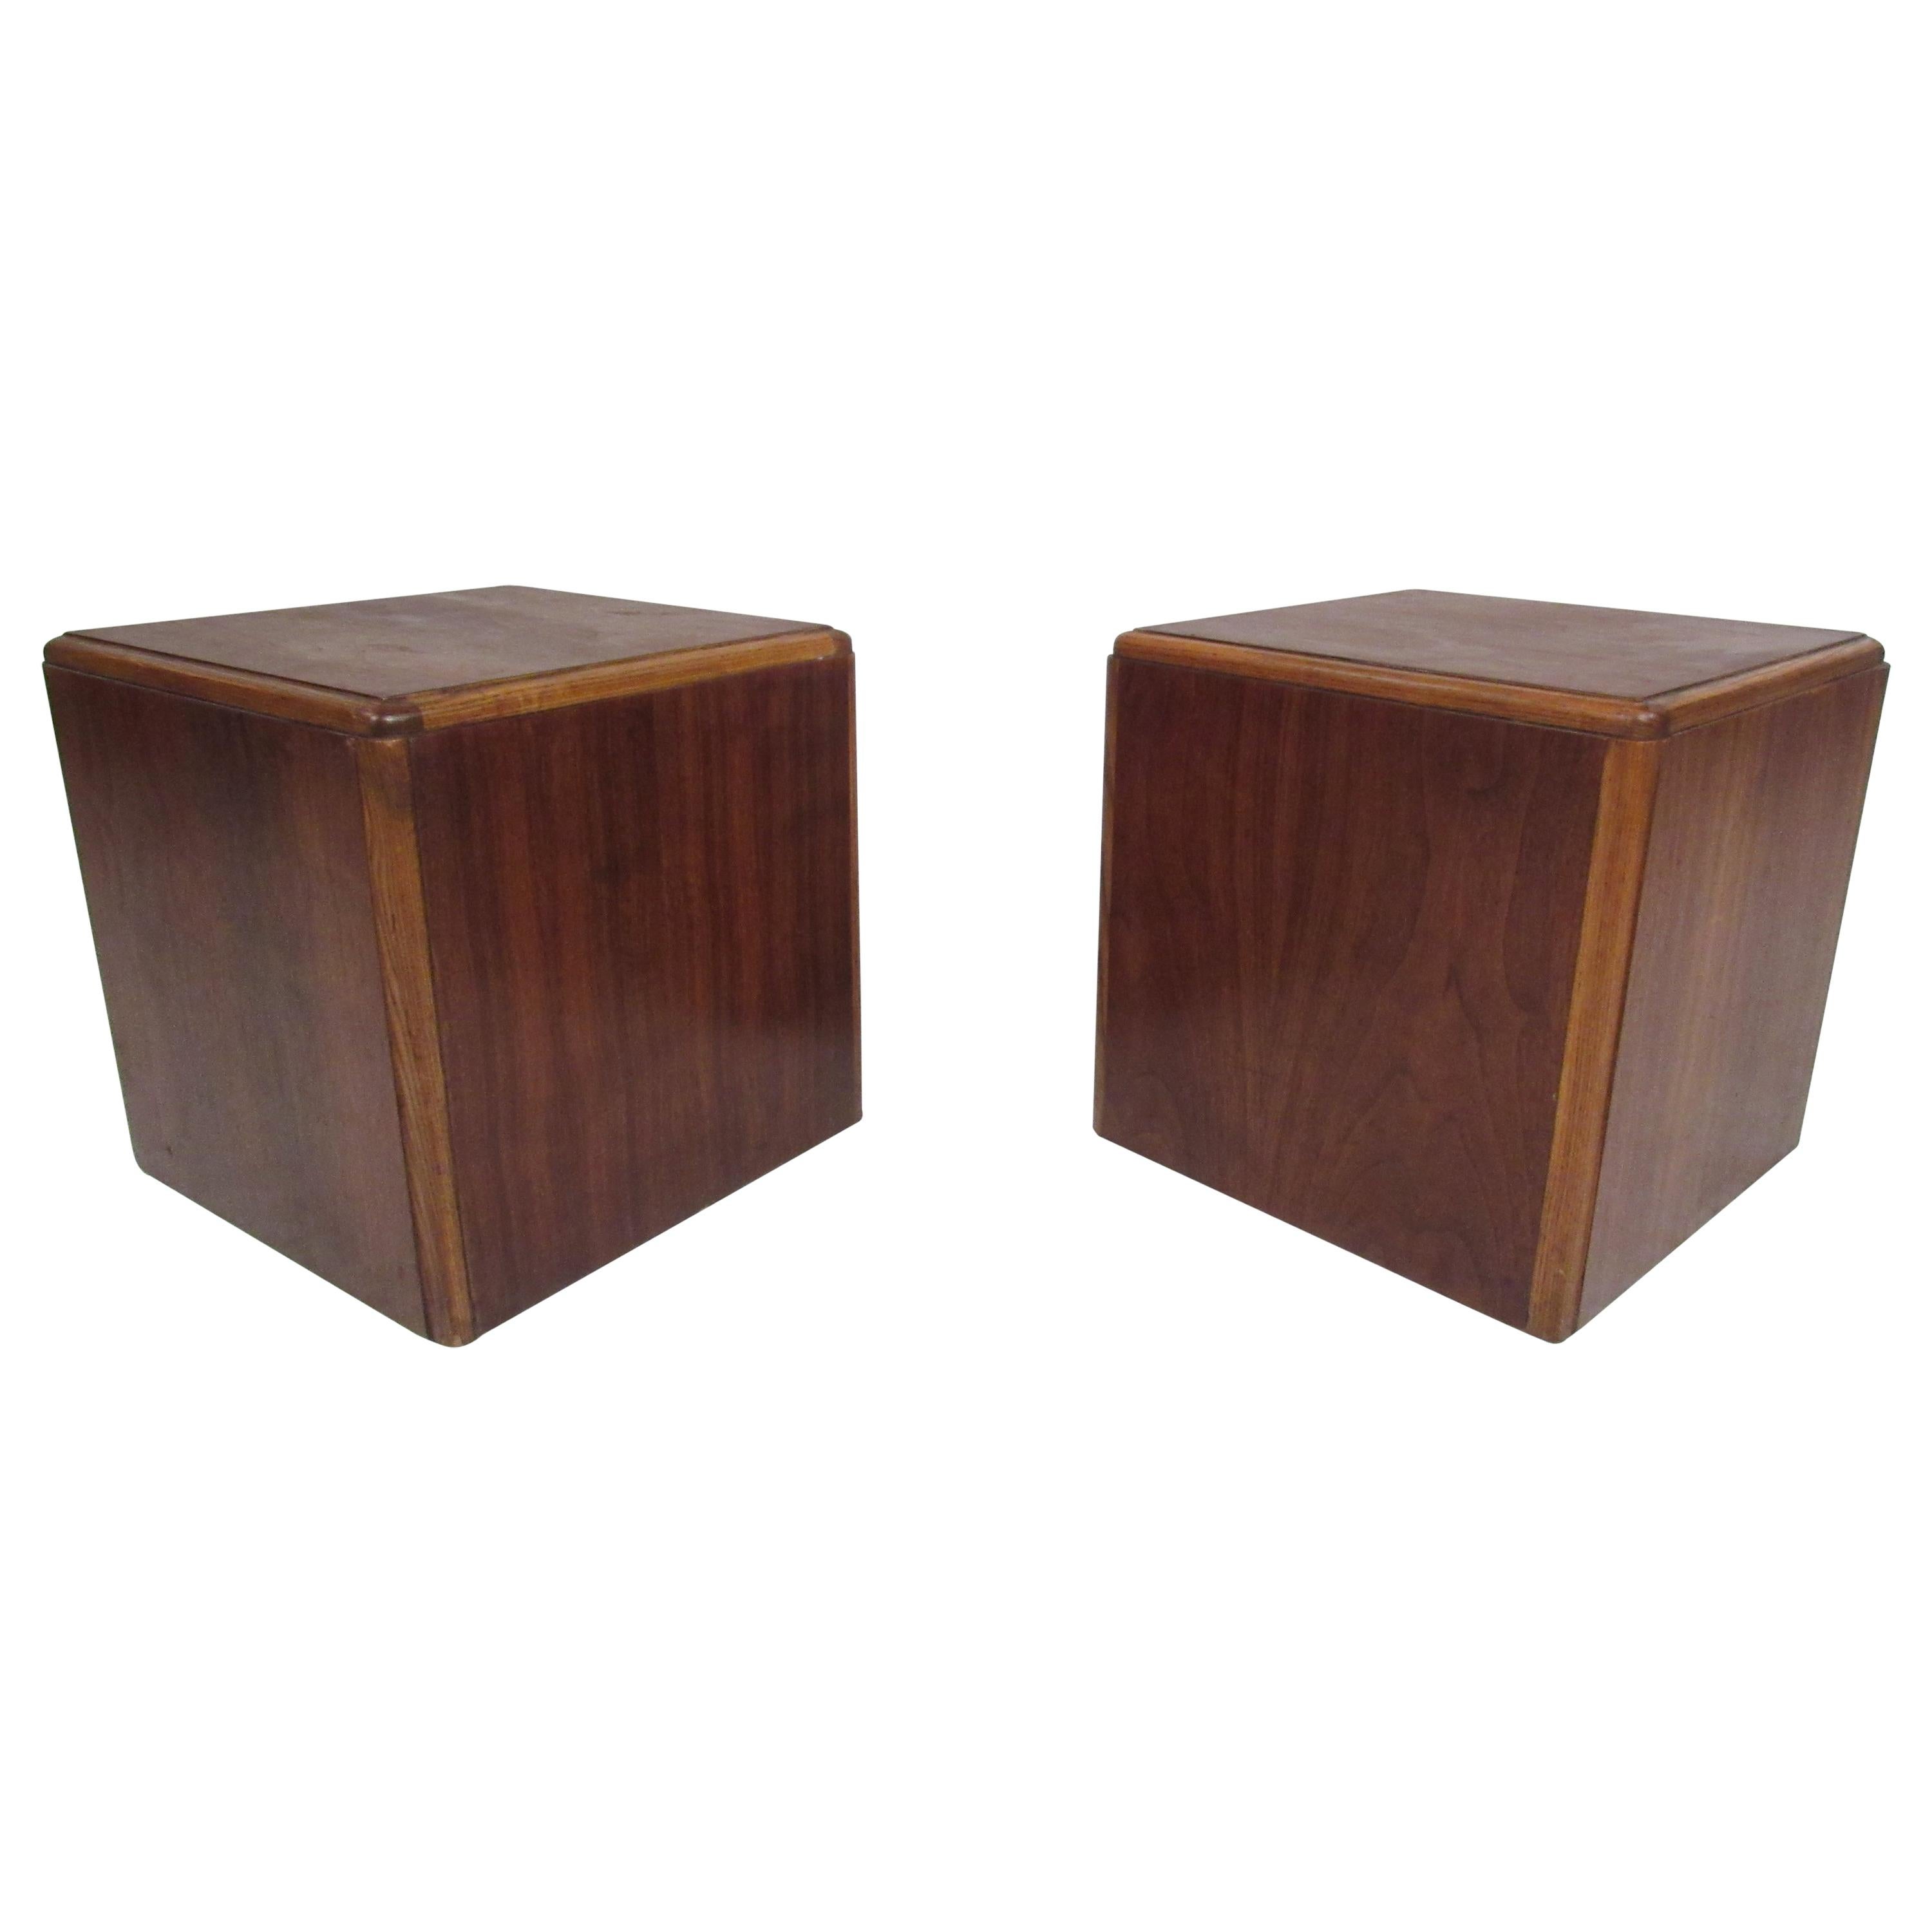 Pair of Vintage Modern Walnut Cube End Tables by Lane Furniture